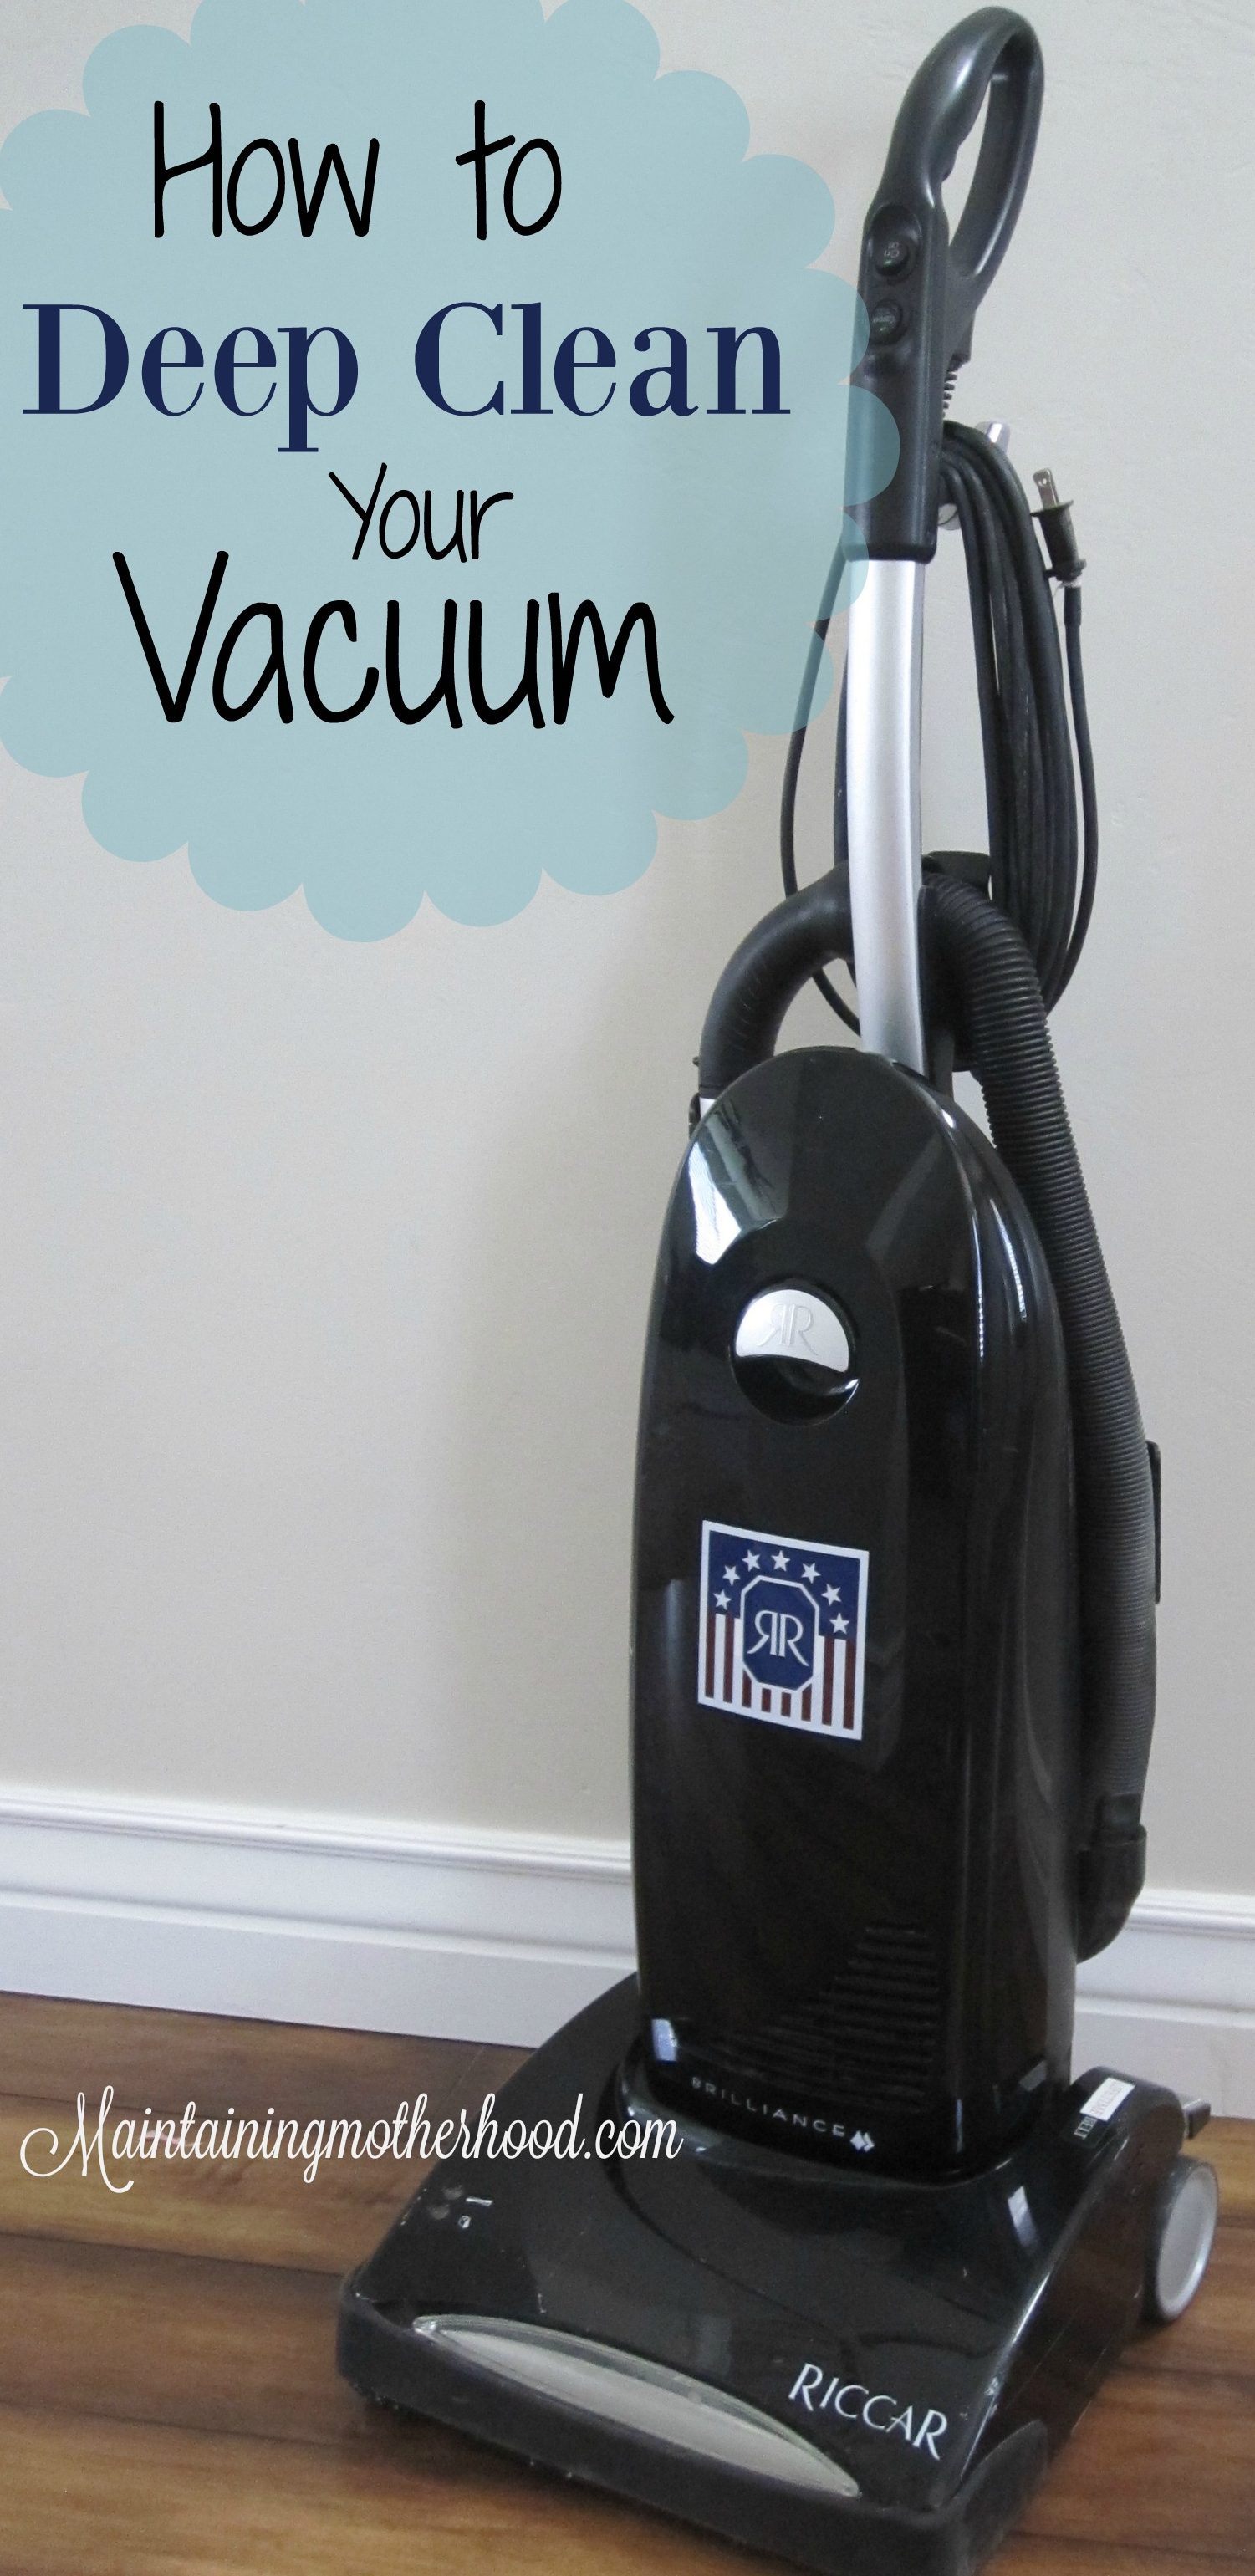 Does your vacuum suck? If not, learn how to deep clean your vacuum: clean filters, unclog, and detangle the nasties. Increase the life of your vacuum!